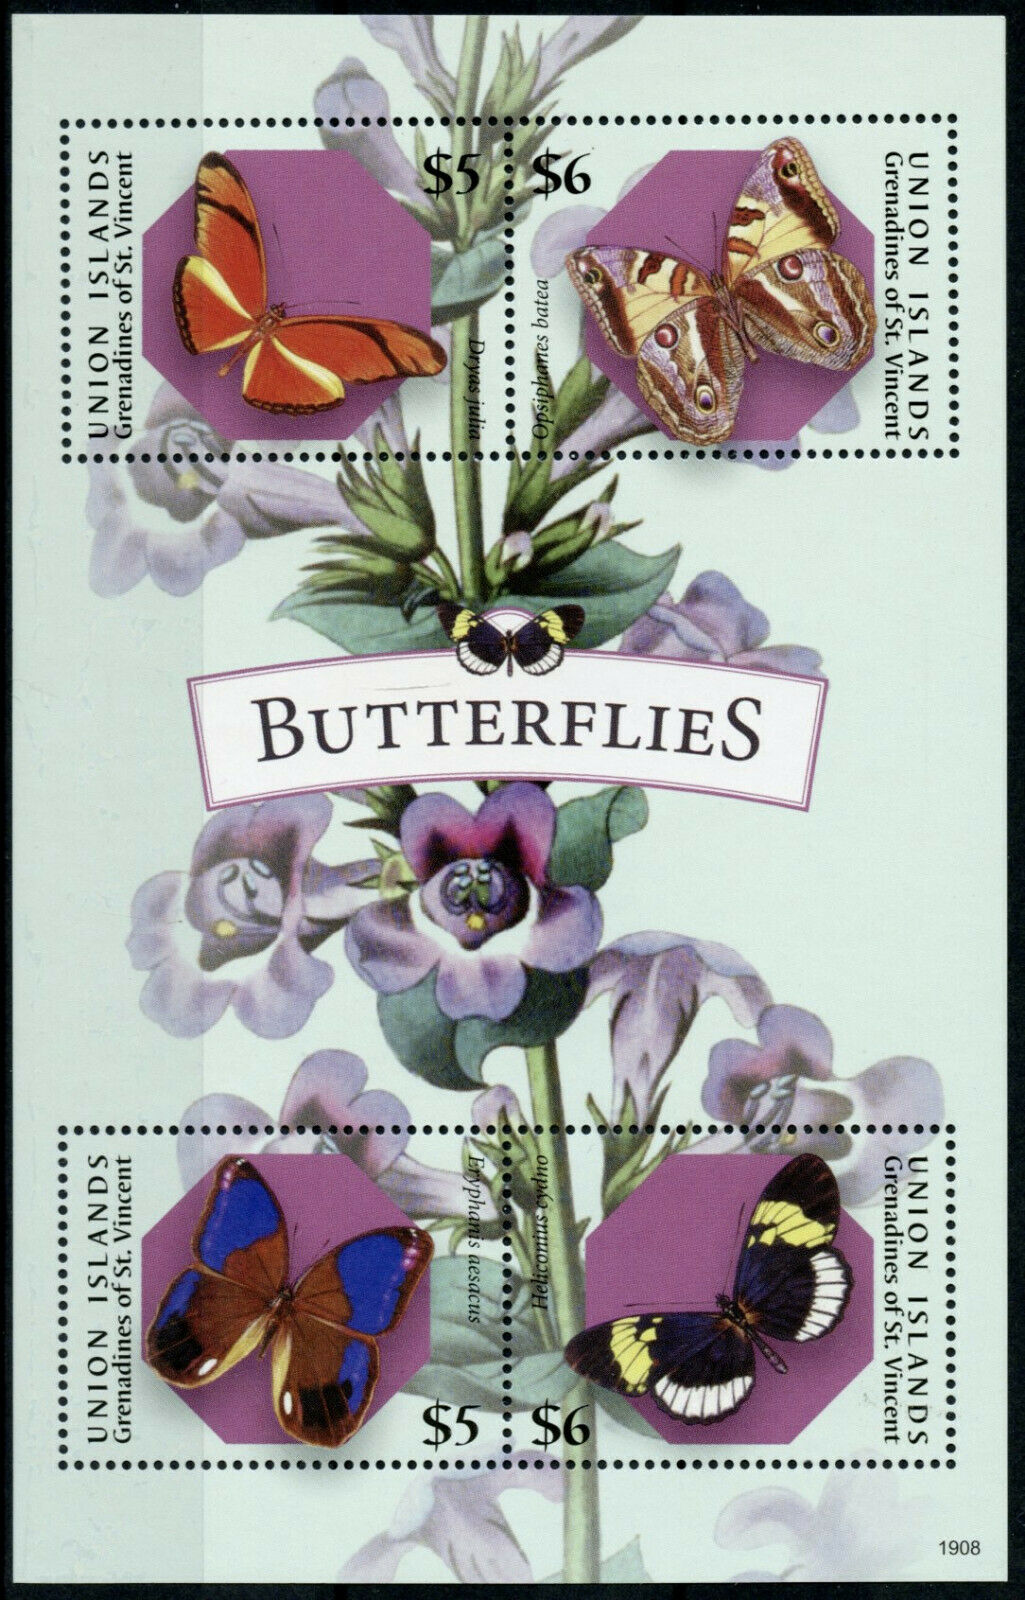 Union Island Gren St Vincent Butterflies Stamps 2019 MNH Butterfly Insects 4v MS